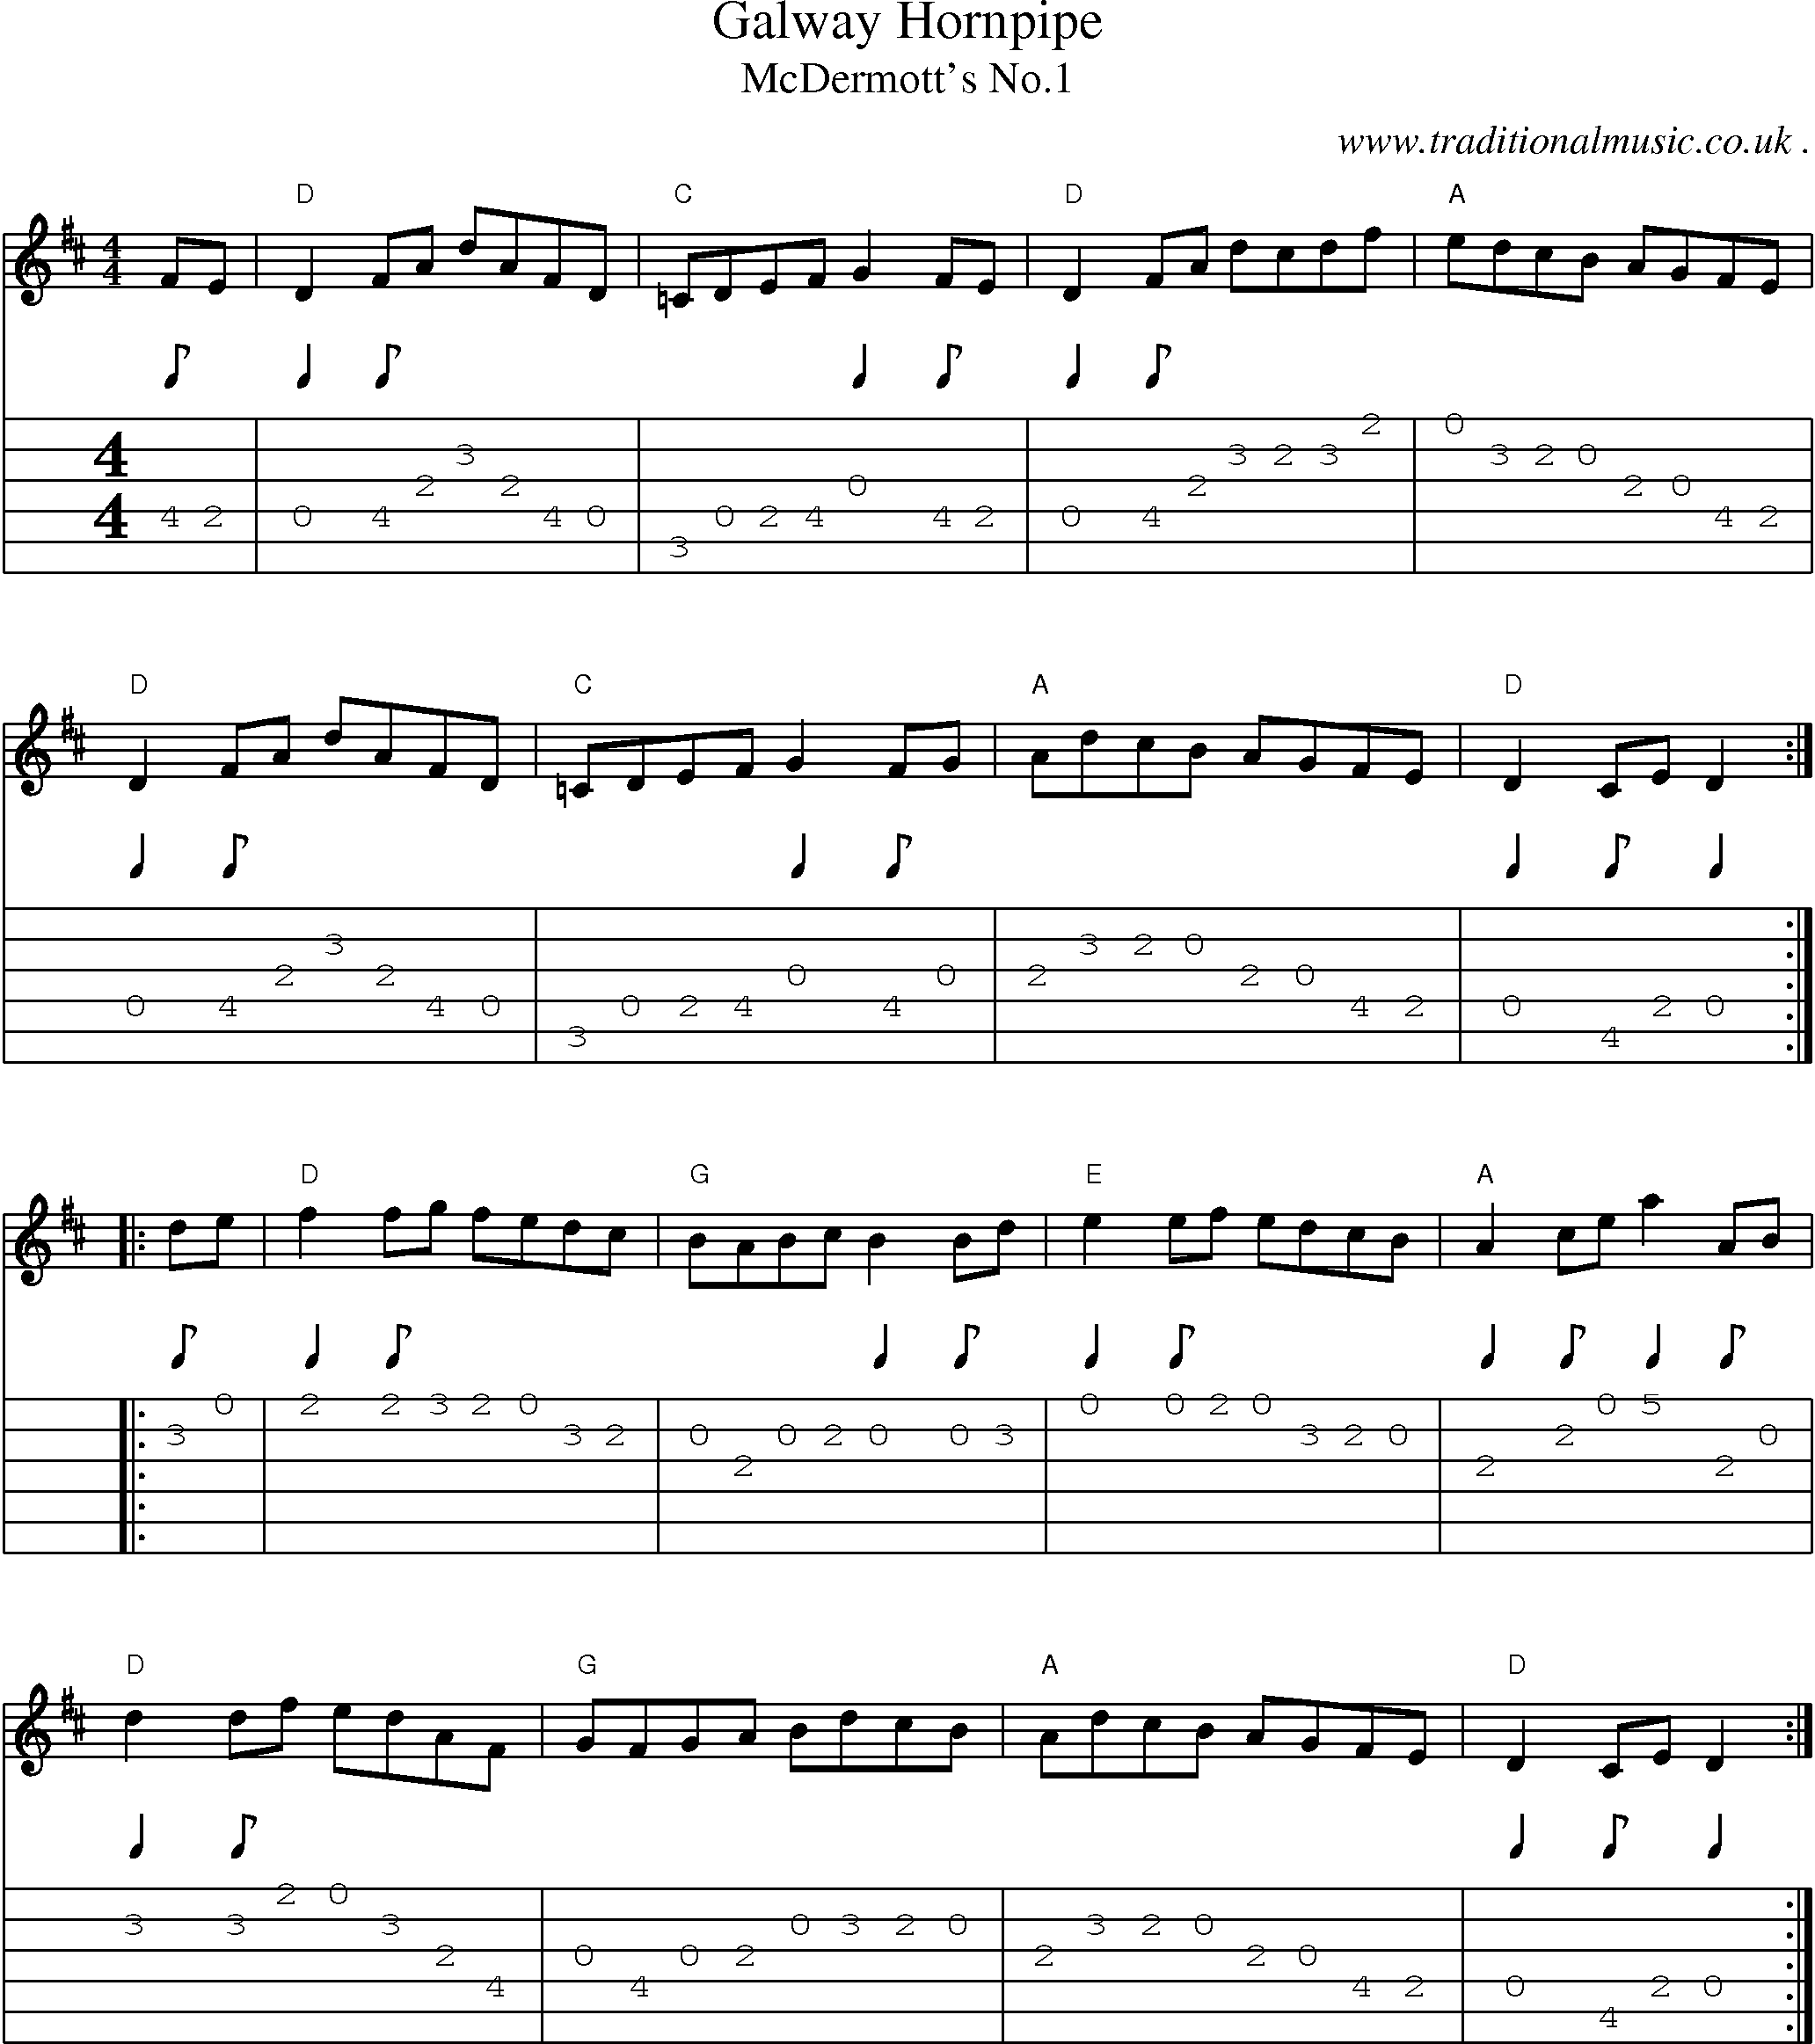 Music Score and Guitar Tabs for Galway Hornpipe